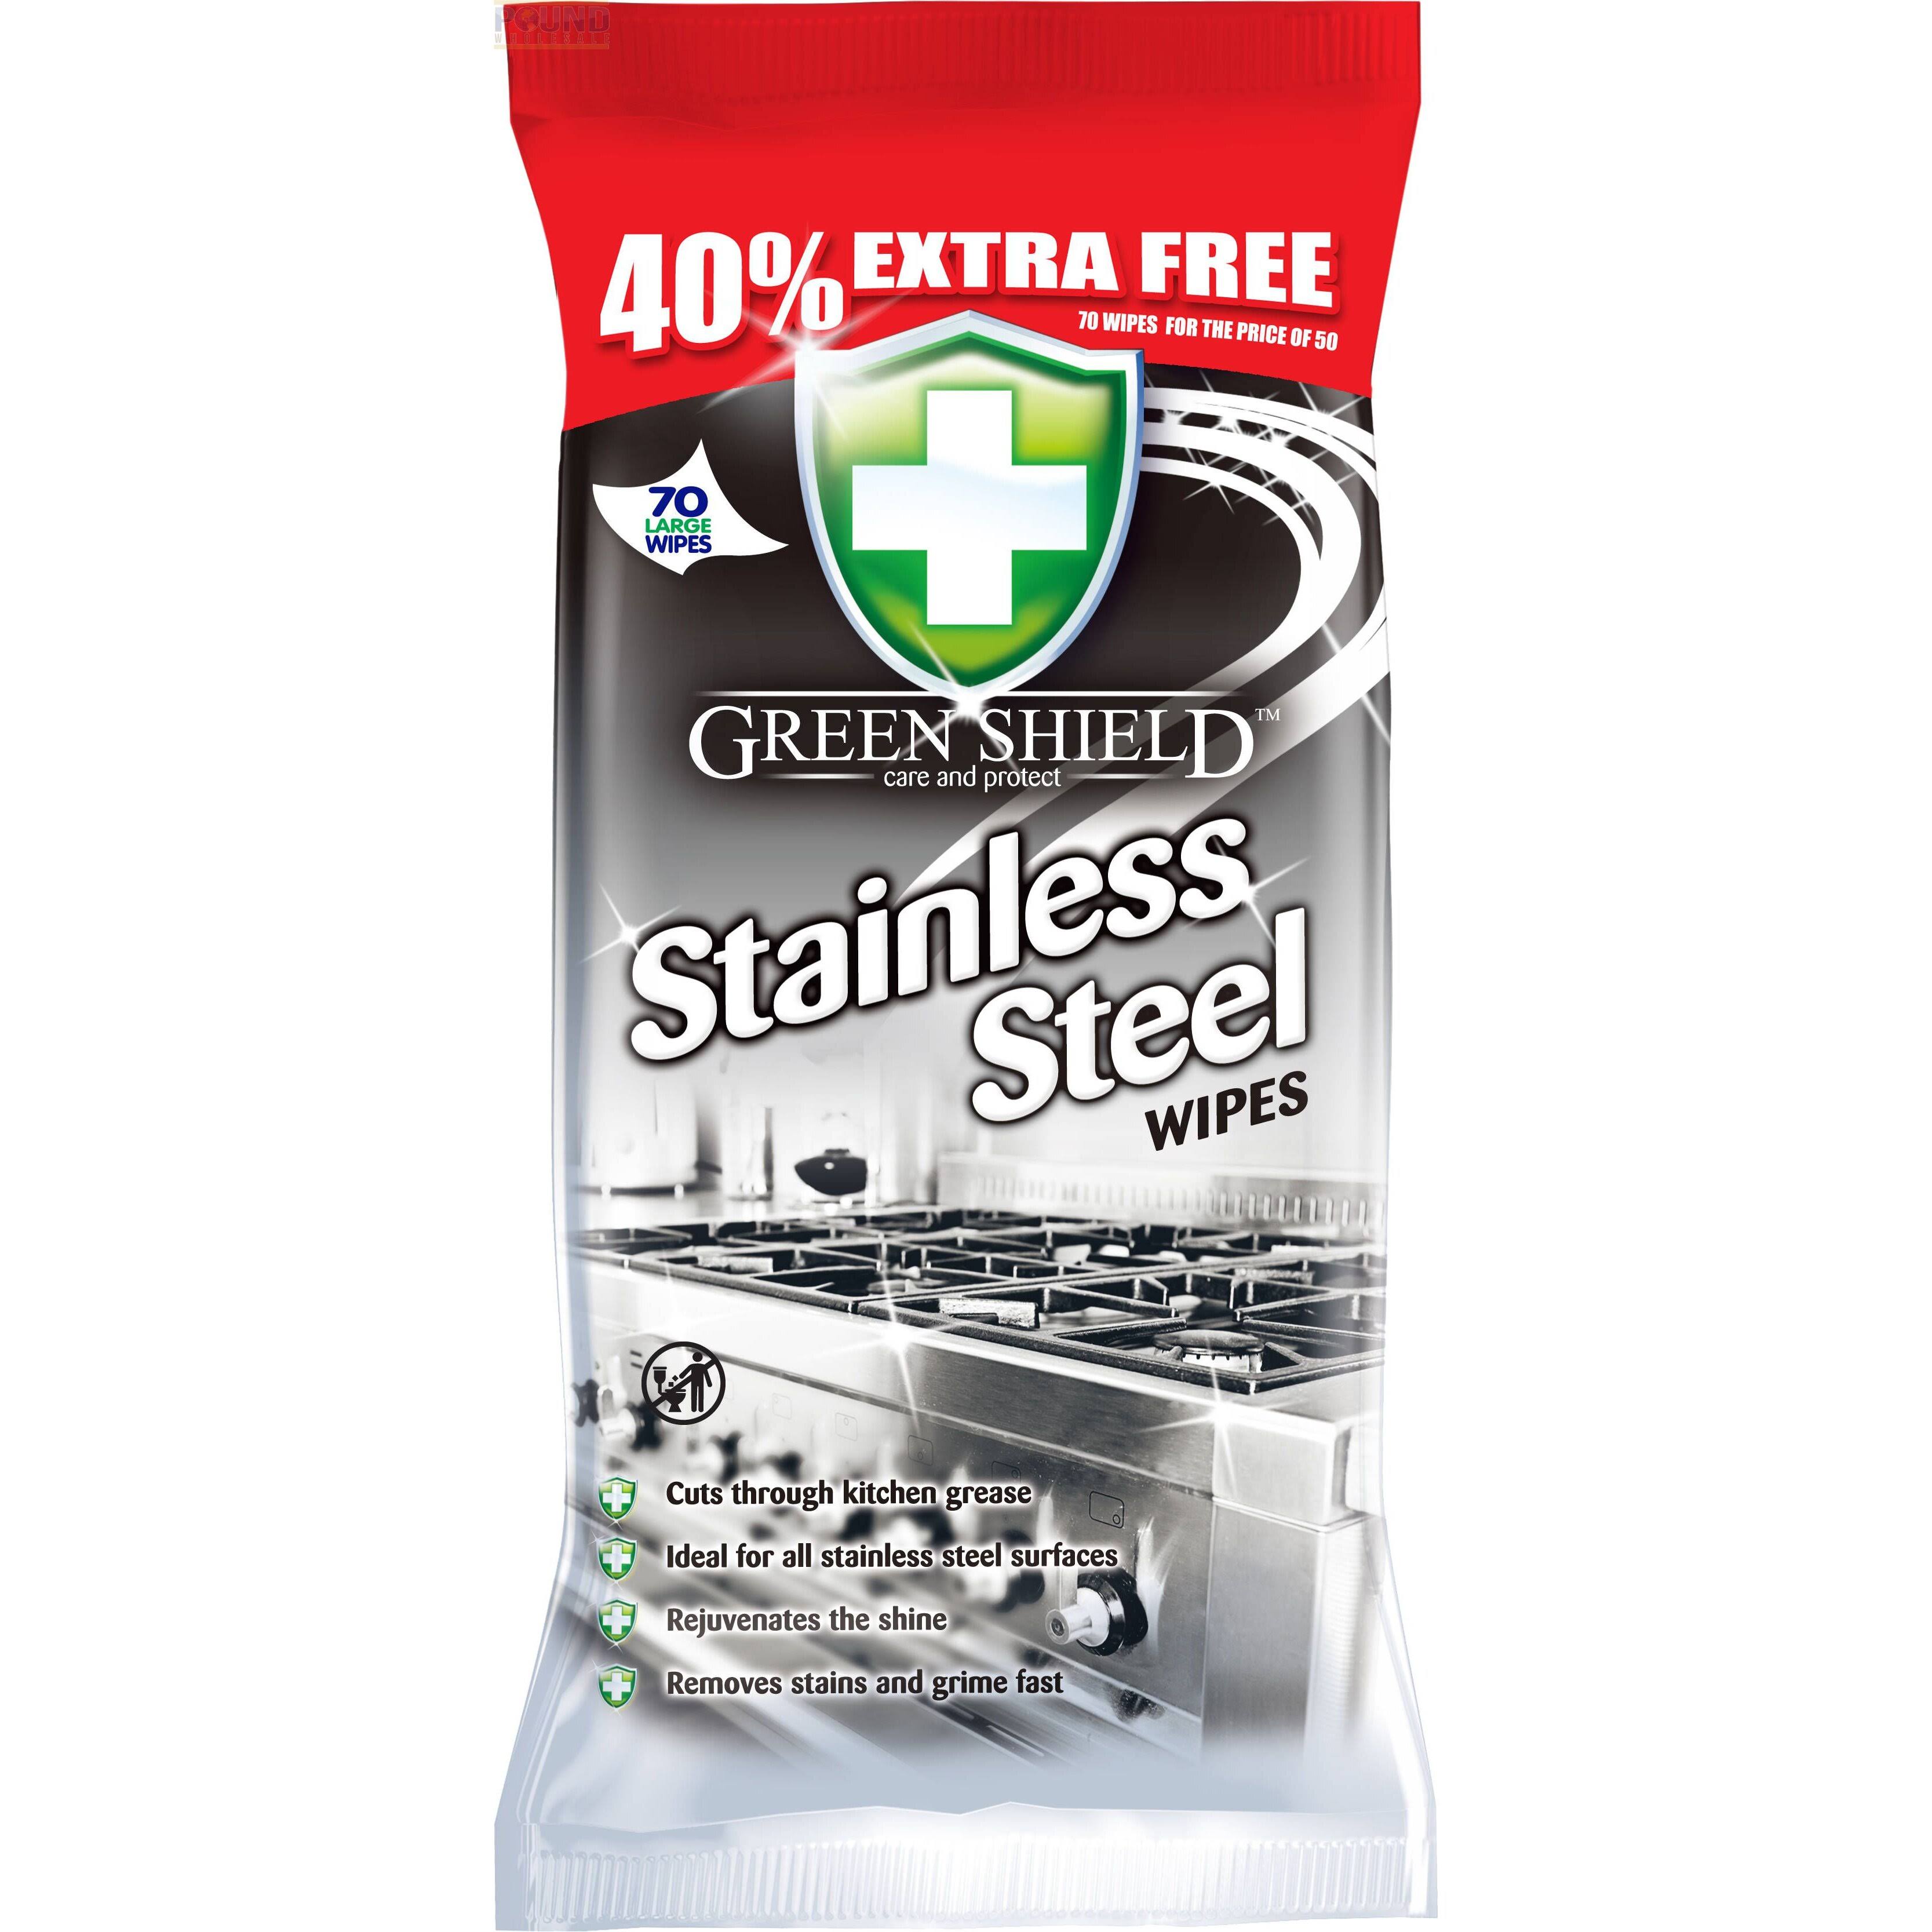 Green Shield Stainless Steel Wipes - 70 PCS